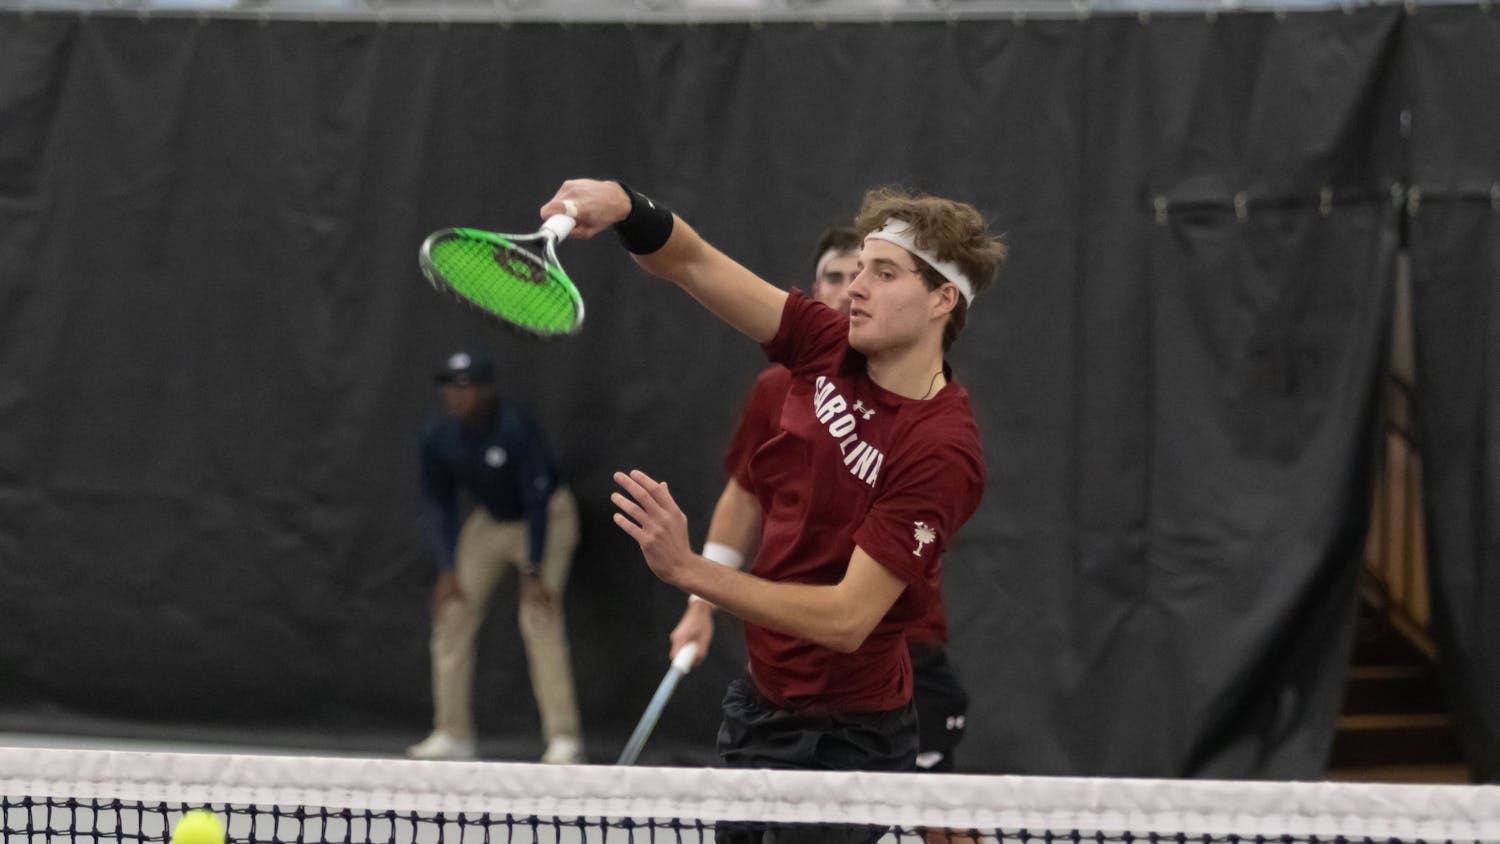 Junior Toby Samuel slams the ball to win a point during his doubles match with junior Connor Thomson at the ITA Kickoff Weekend event at the Carolina Indoor Tennis Center on Jan. 28, 2023. The South Carolina Gamecocks beat Penn 4-0.